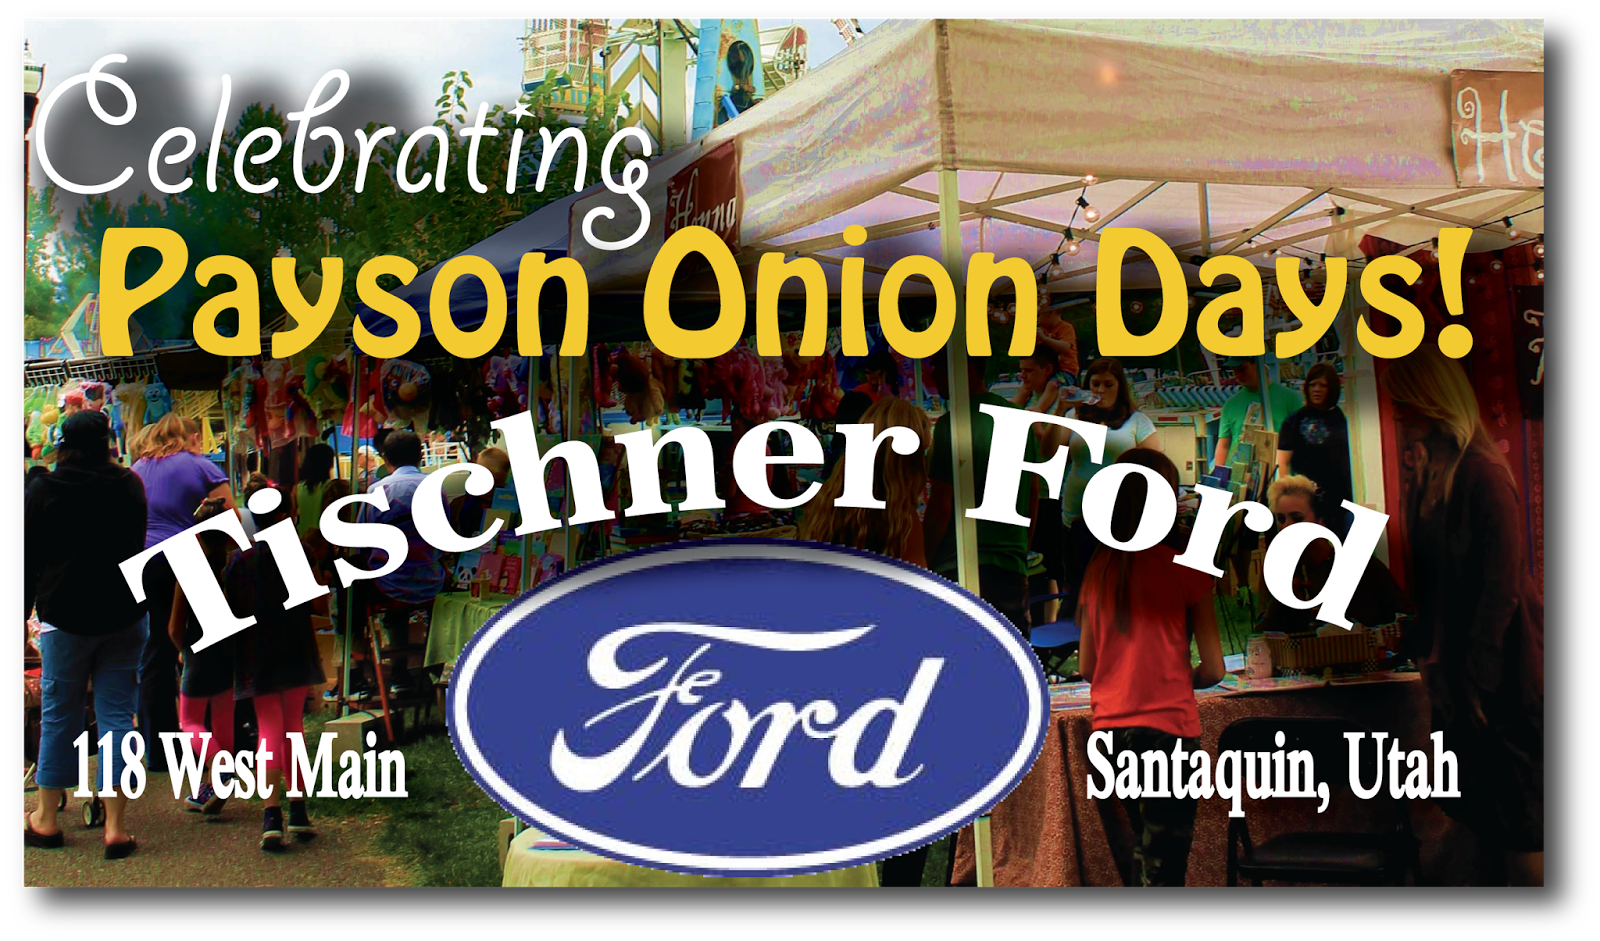 The Payson Chronicle Celebrating Onion Days Schedule of Events